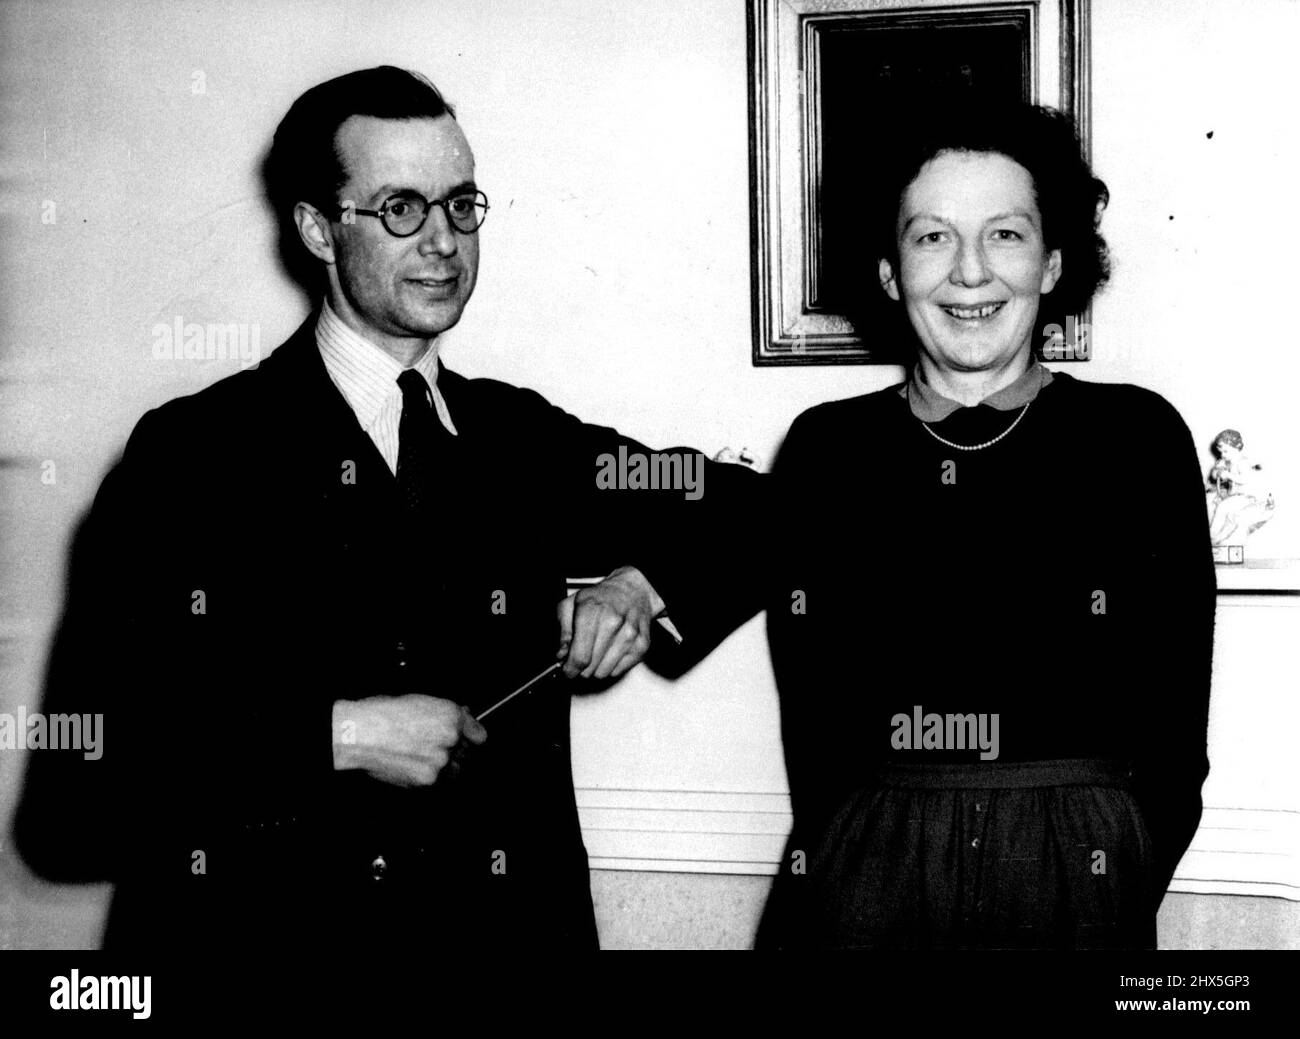 ***** Britain -- Sir Edwin Plowden, photographed with his wife Lady Plowden at their flat. Mr. Attlee announced in the commons to-day ***** Sir Edwin Plowden has accepted she post of the Government's chief planning officer. He is 40 ***** director of ***** and was chief executive of the Ministry of Aircraft production in 1945-46. June 17, 1947. Stock Photo